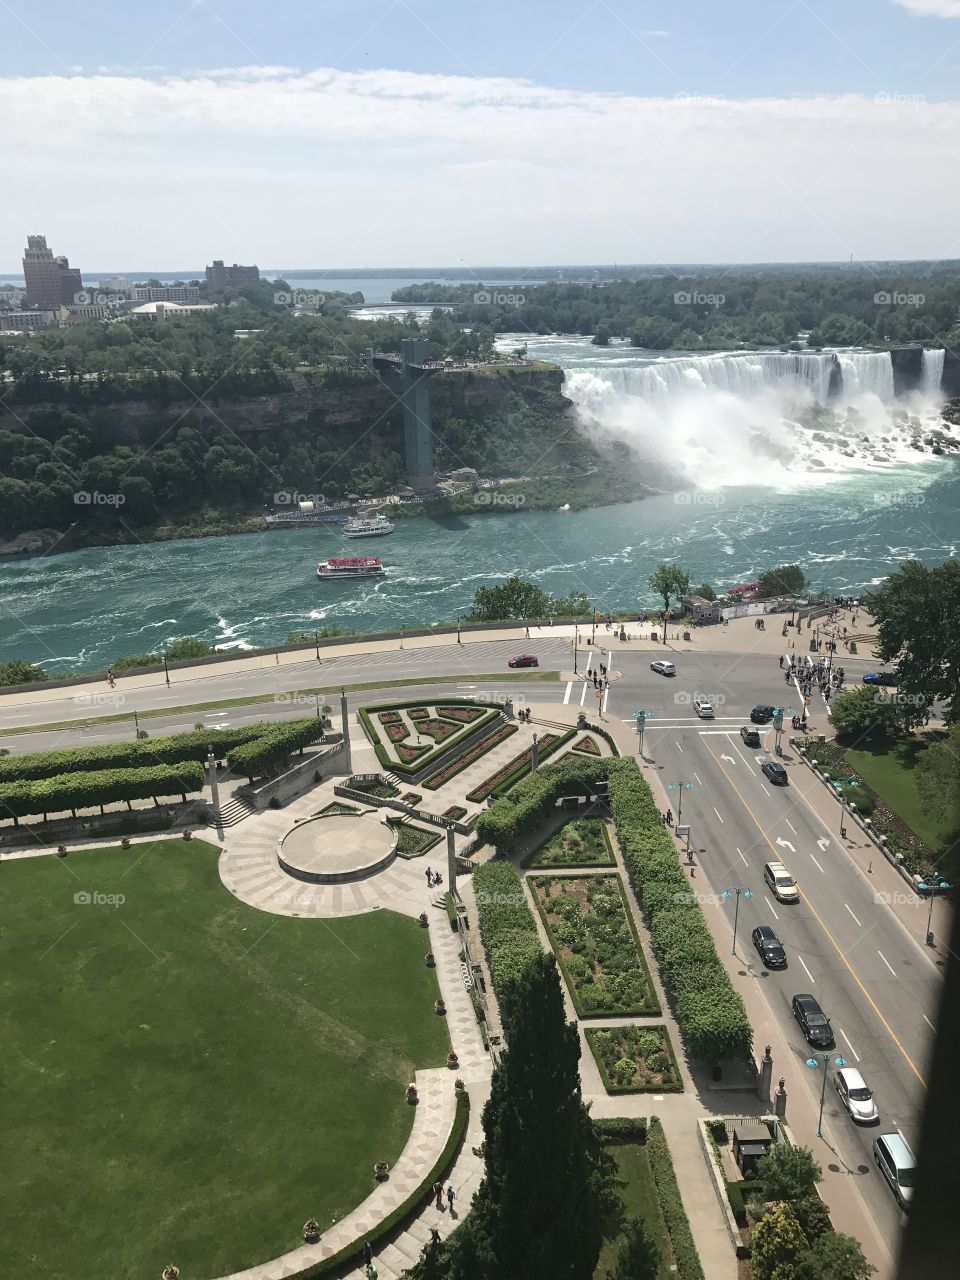 Niagra Falls from the balcony of our Canadian hotel room